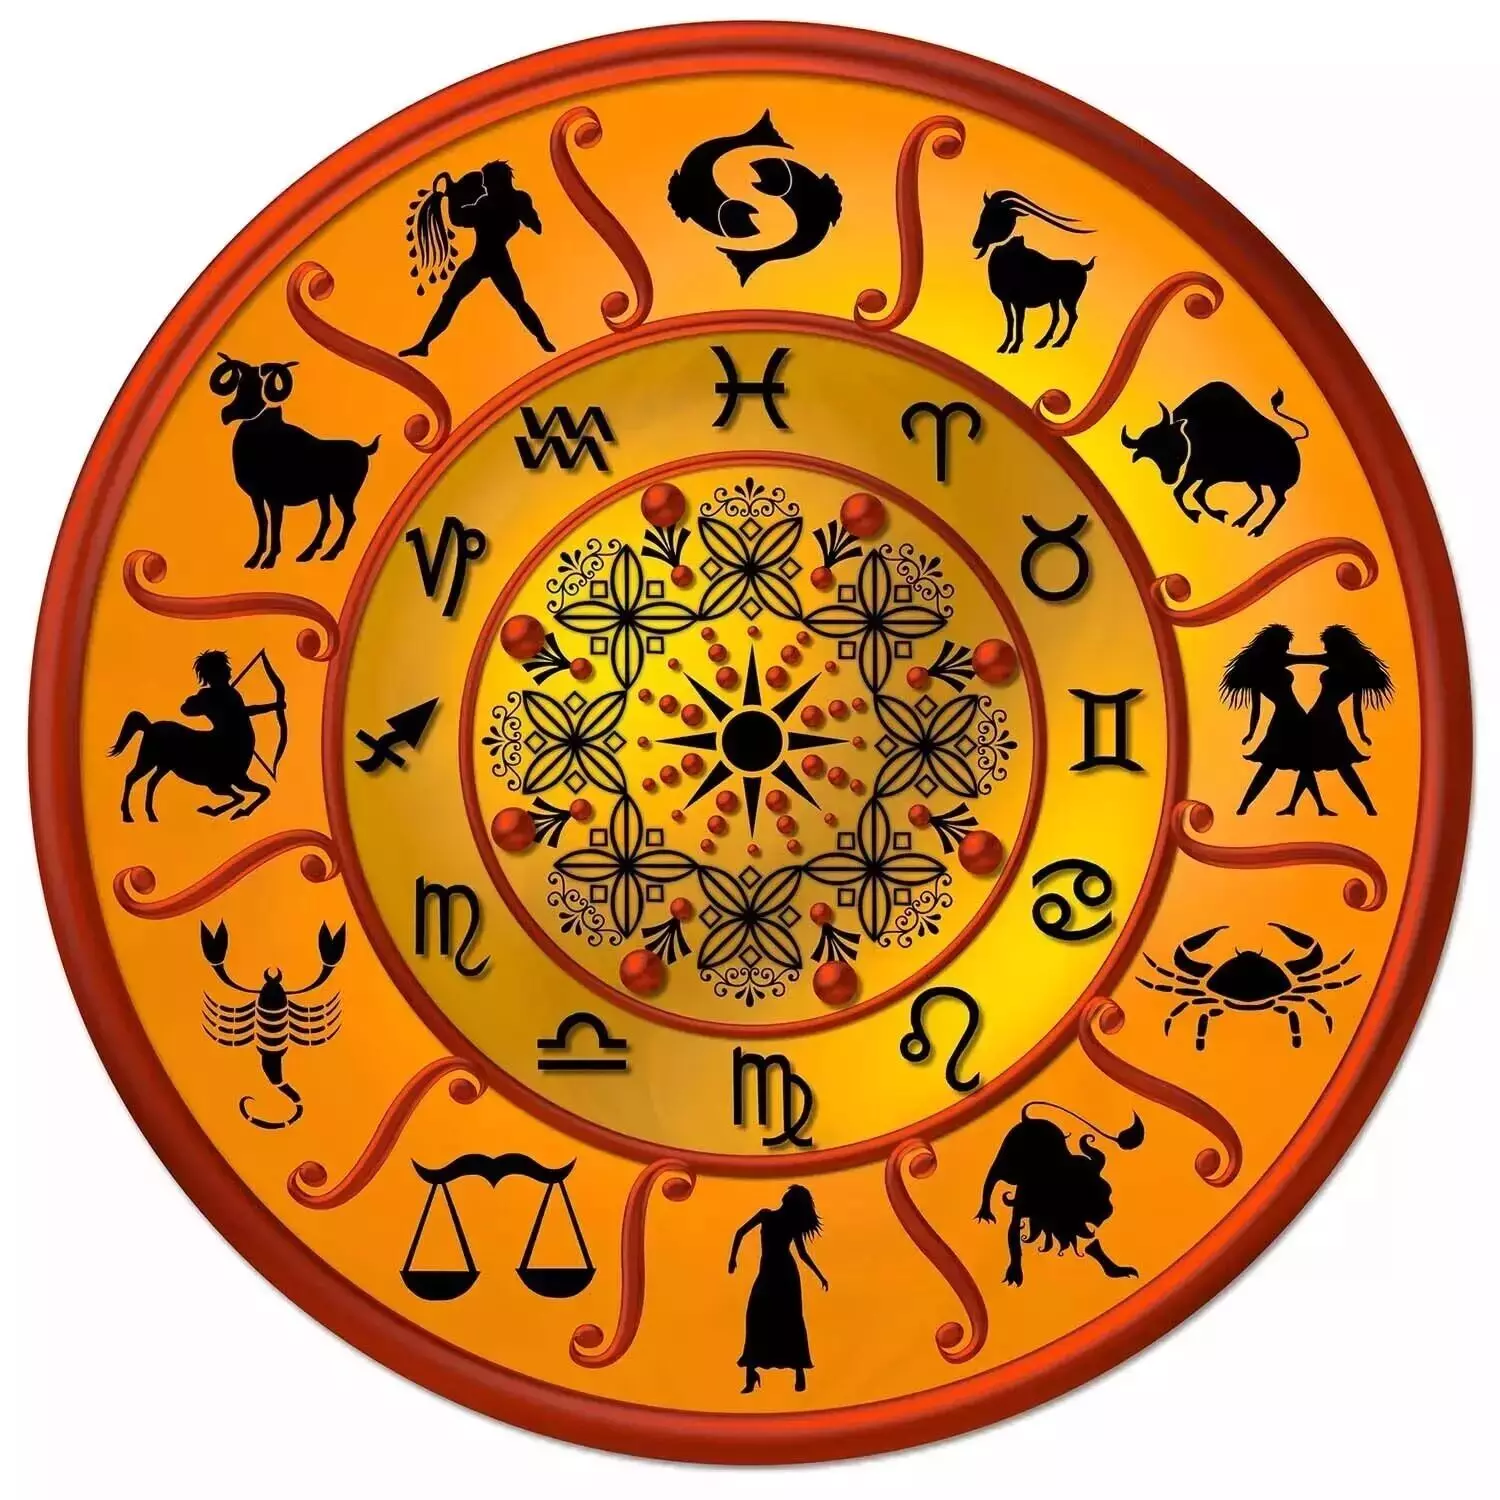 12 February – Know your todays horoscope